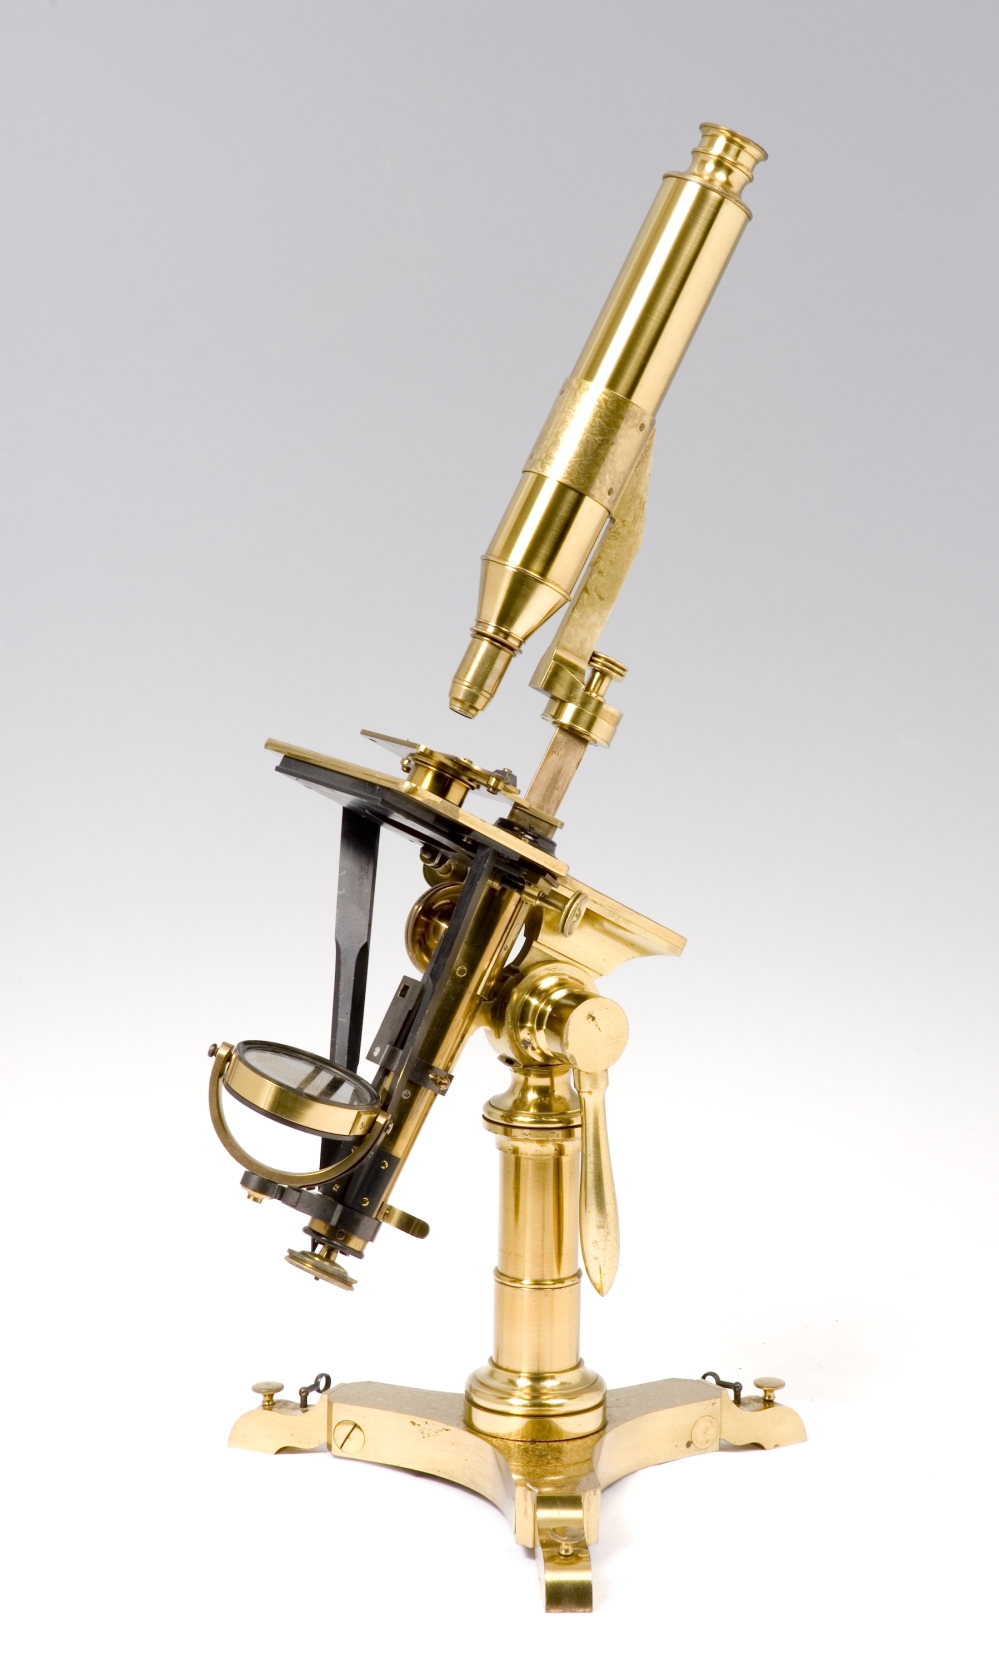 preview image for Compound Microscope in Case, by Andrew Ross, London, c. 1835